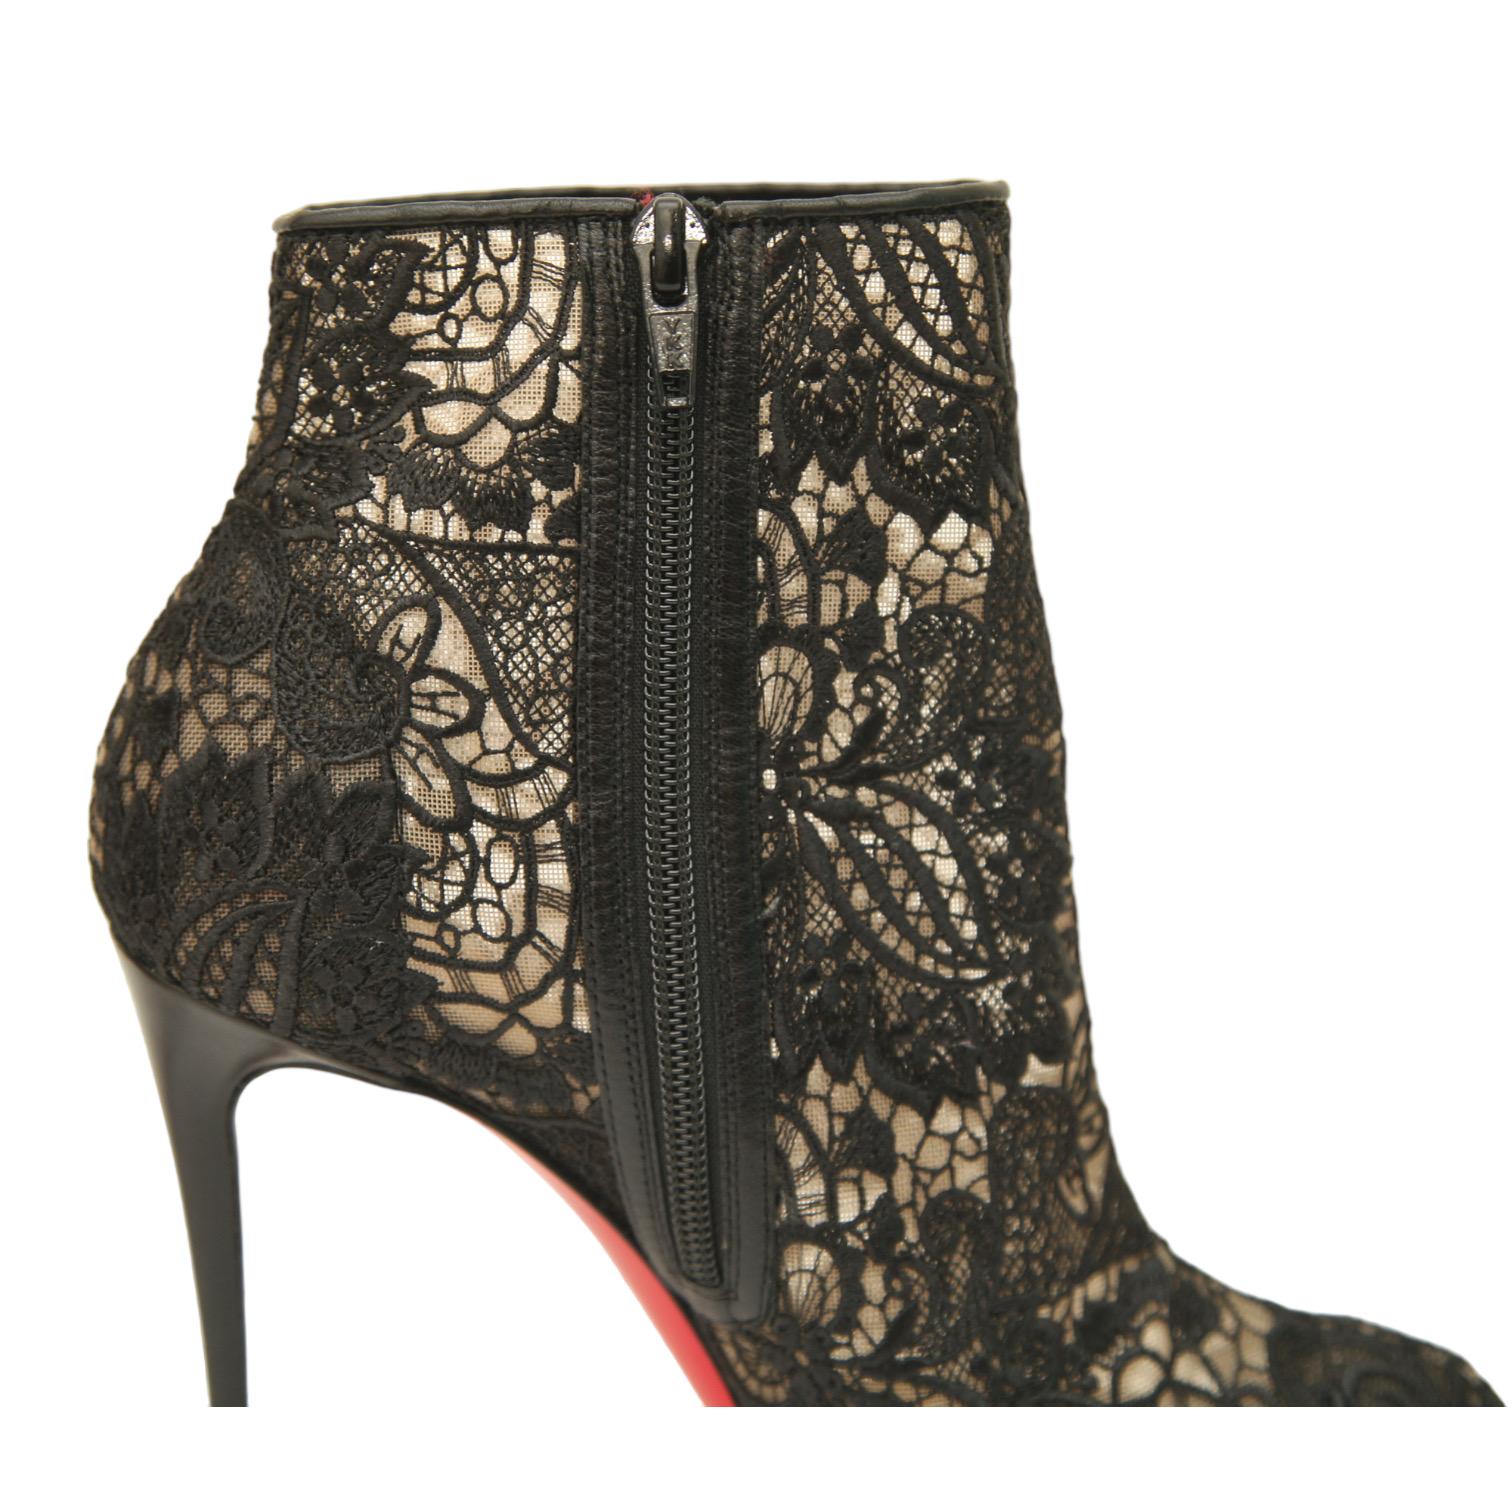 CHRISTIAN LOUBOUTIN Black Lace MISS TENNIS 100 Booties Ankle Boot Leather 38.5 6